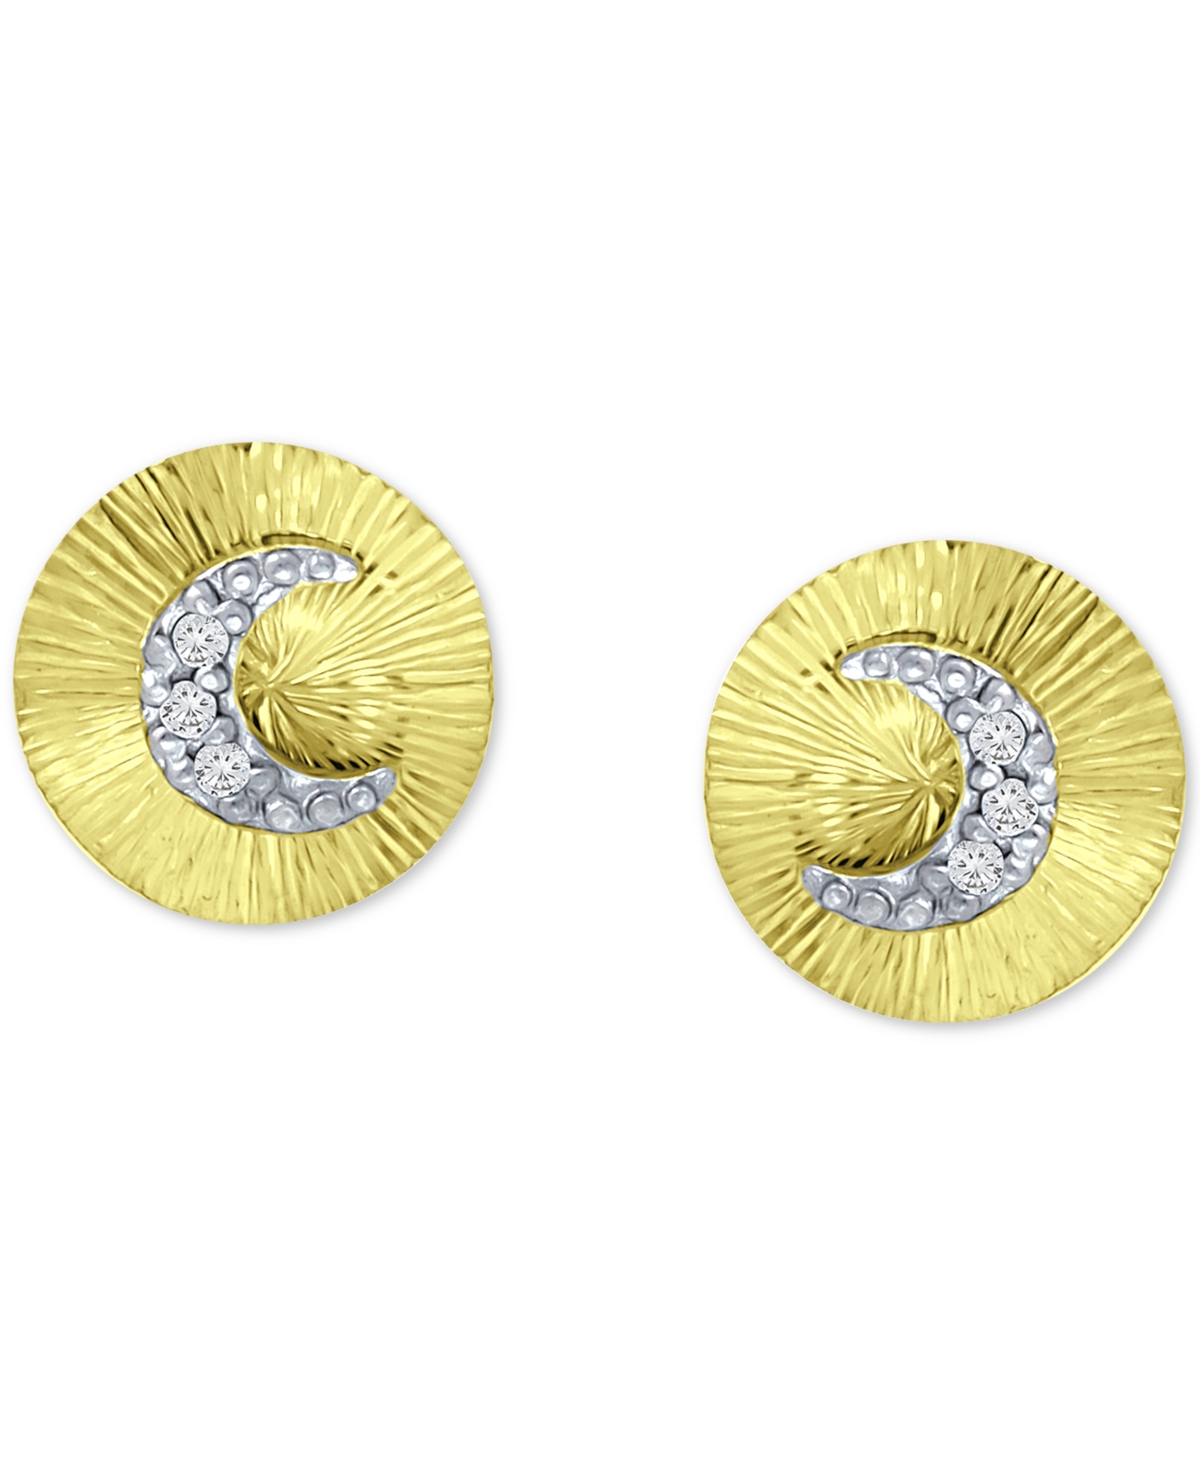 Cubic Zirconia Moon Disc Stud Earrings, Created for Macy's - Gold over Silver